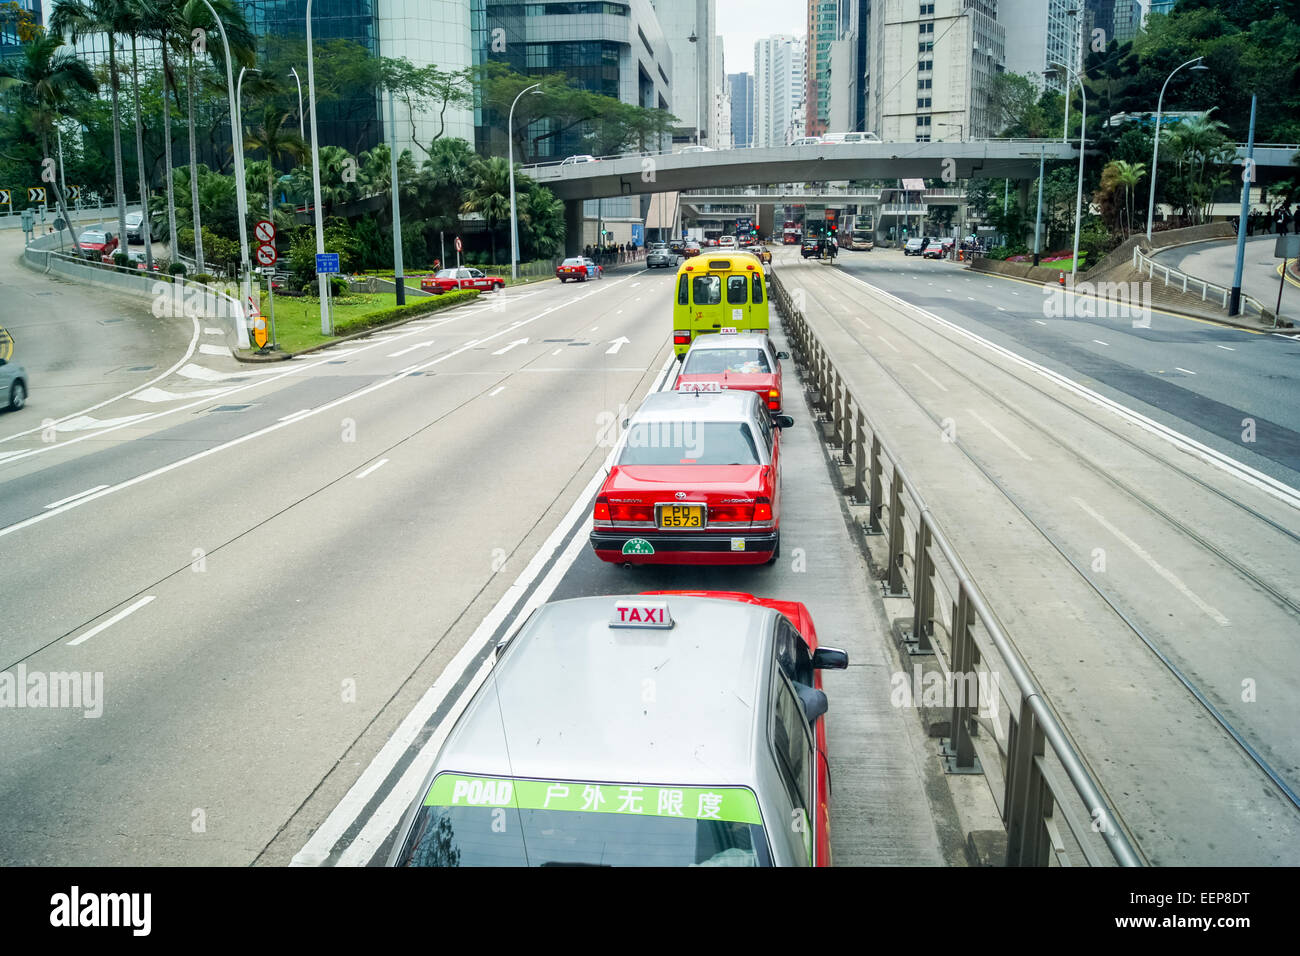 View from the top deck of a double decker bus going to the top of The Peak, Hong Kong Island Stock Photo